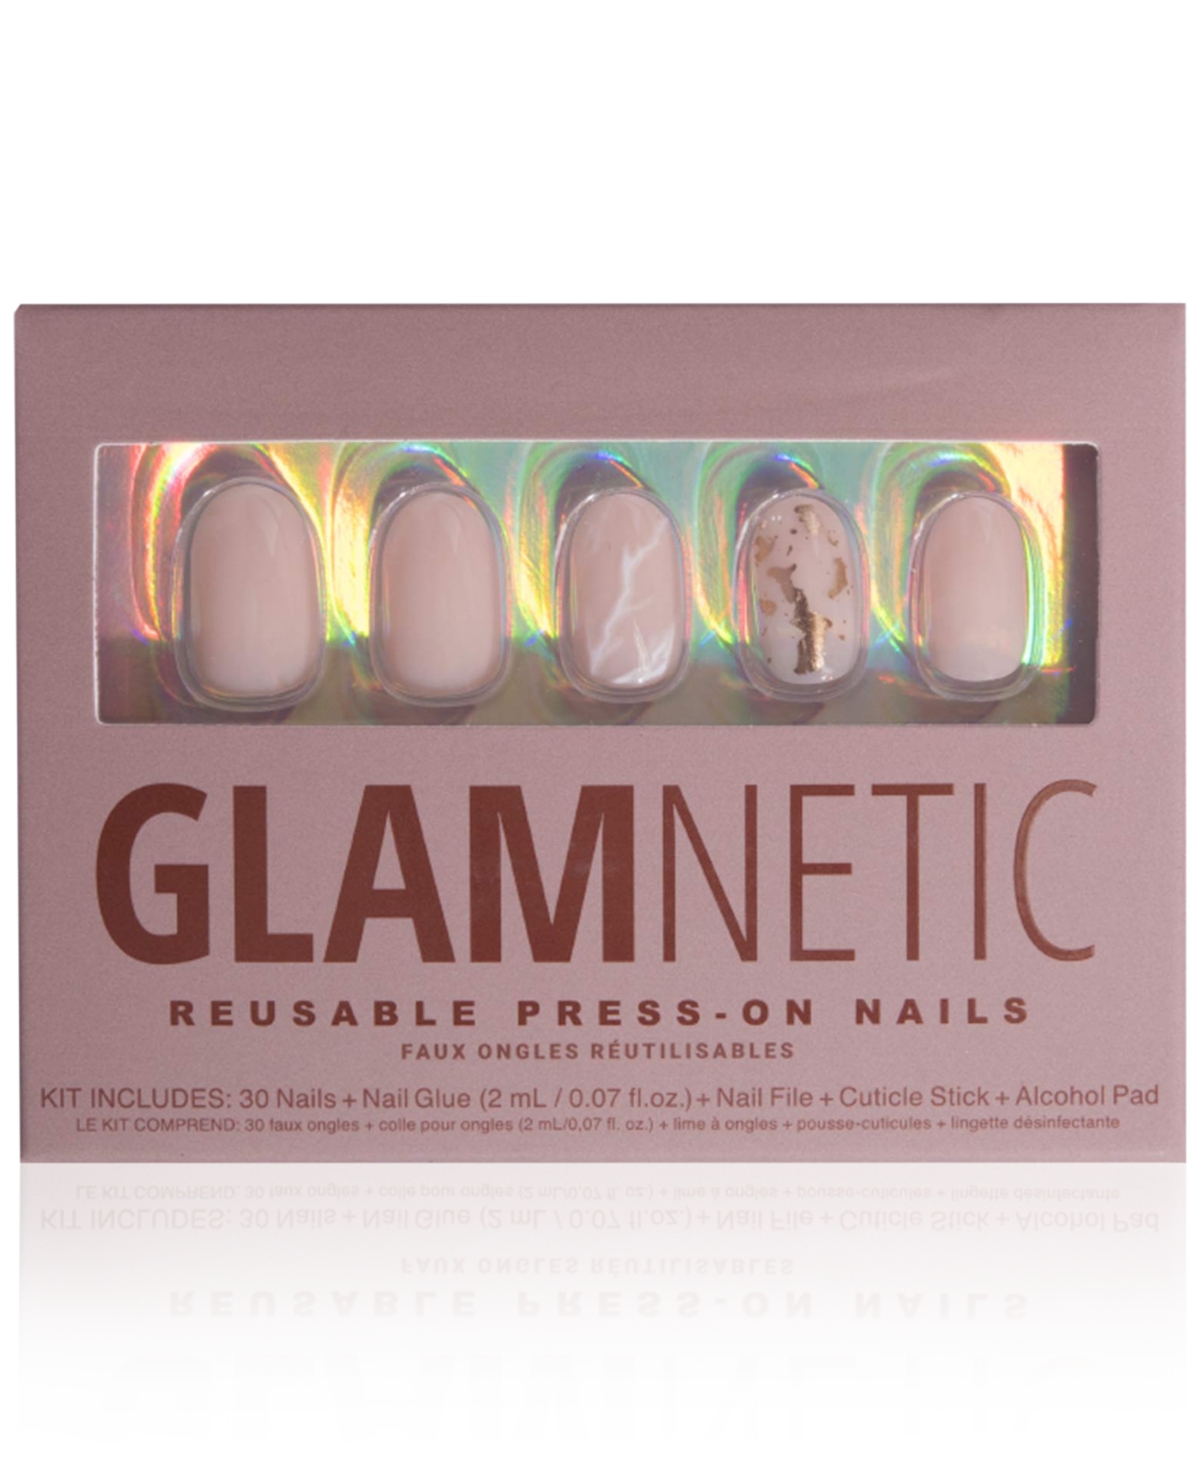 Glamnetic Press-on Nails - Sweetener In Nude